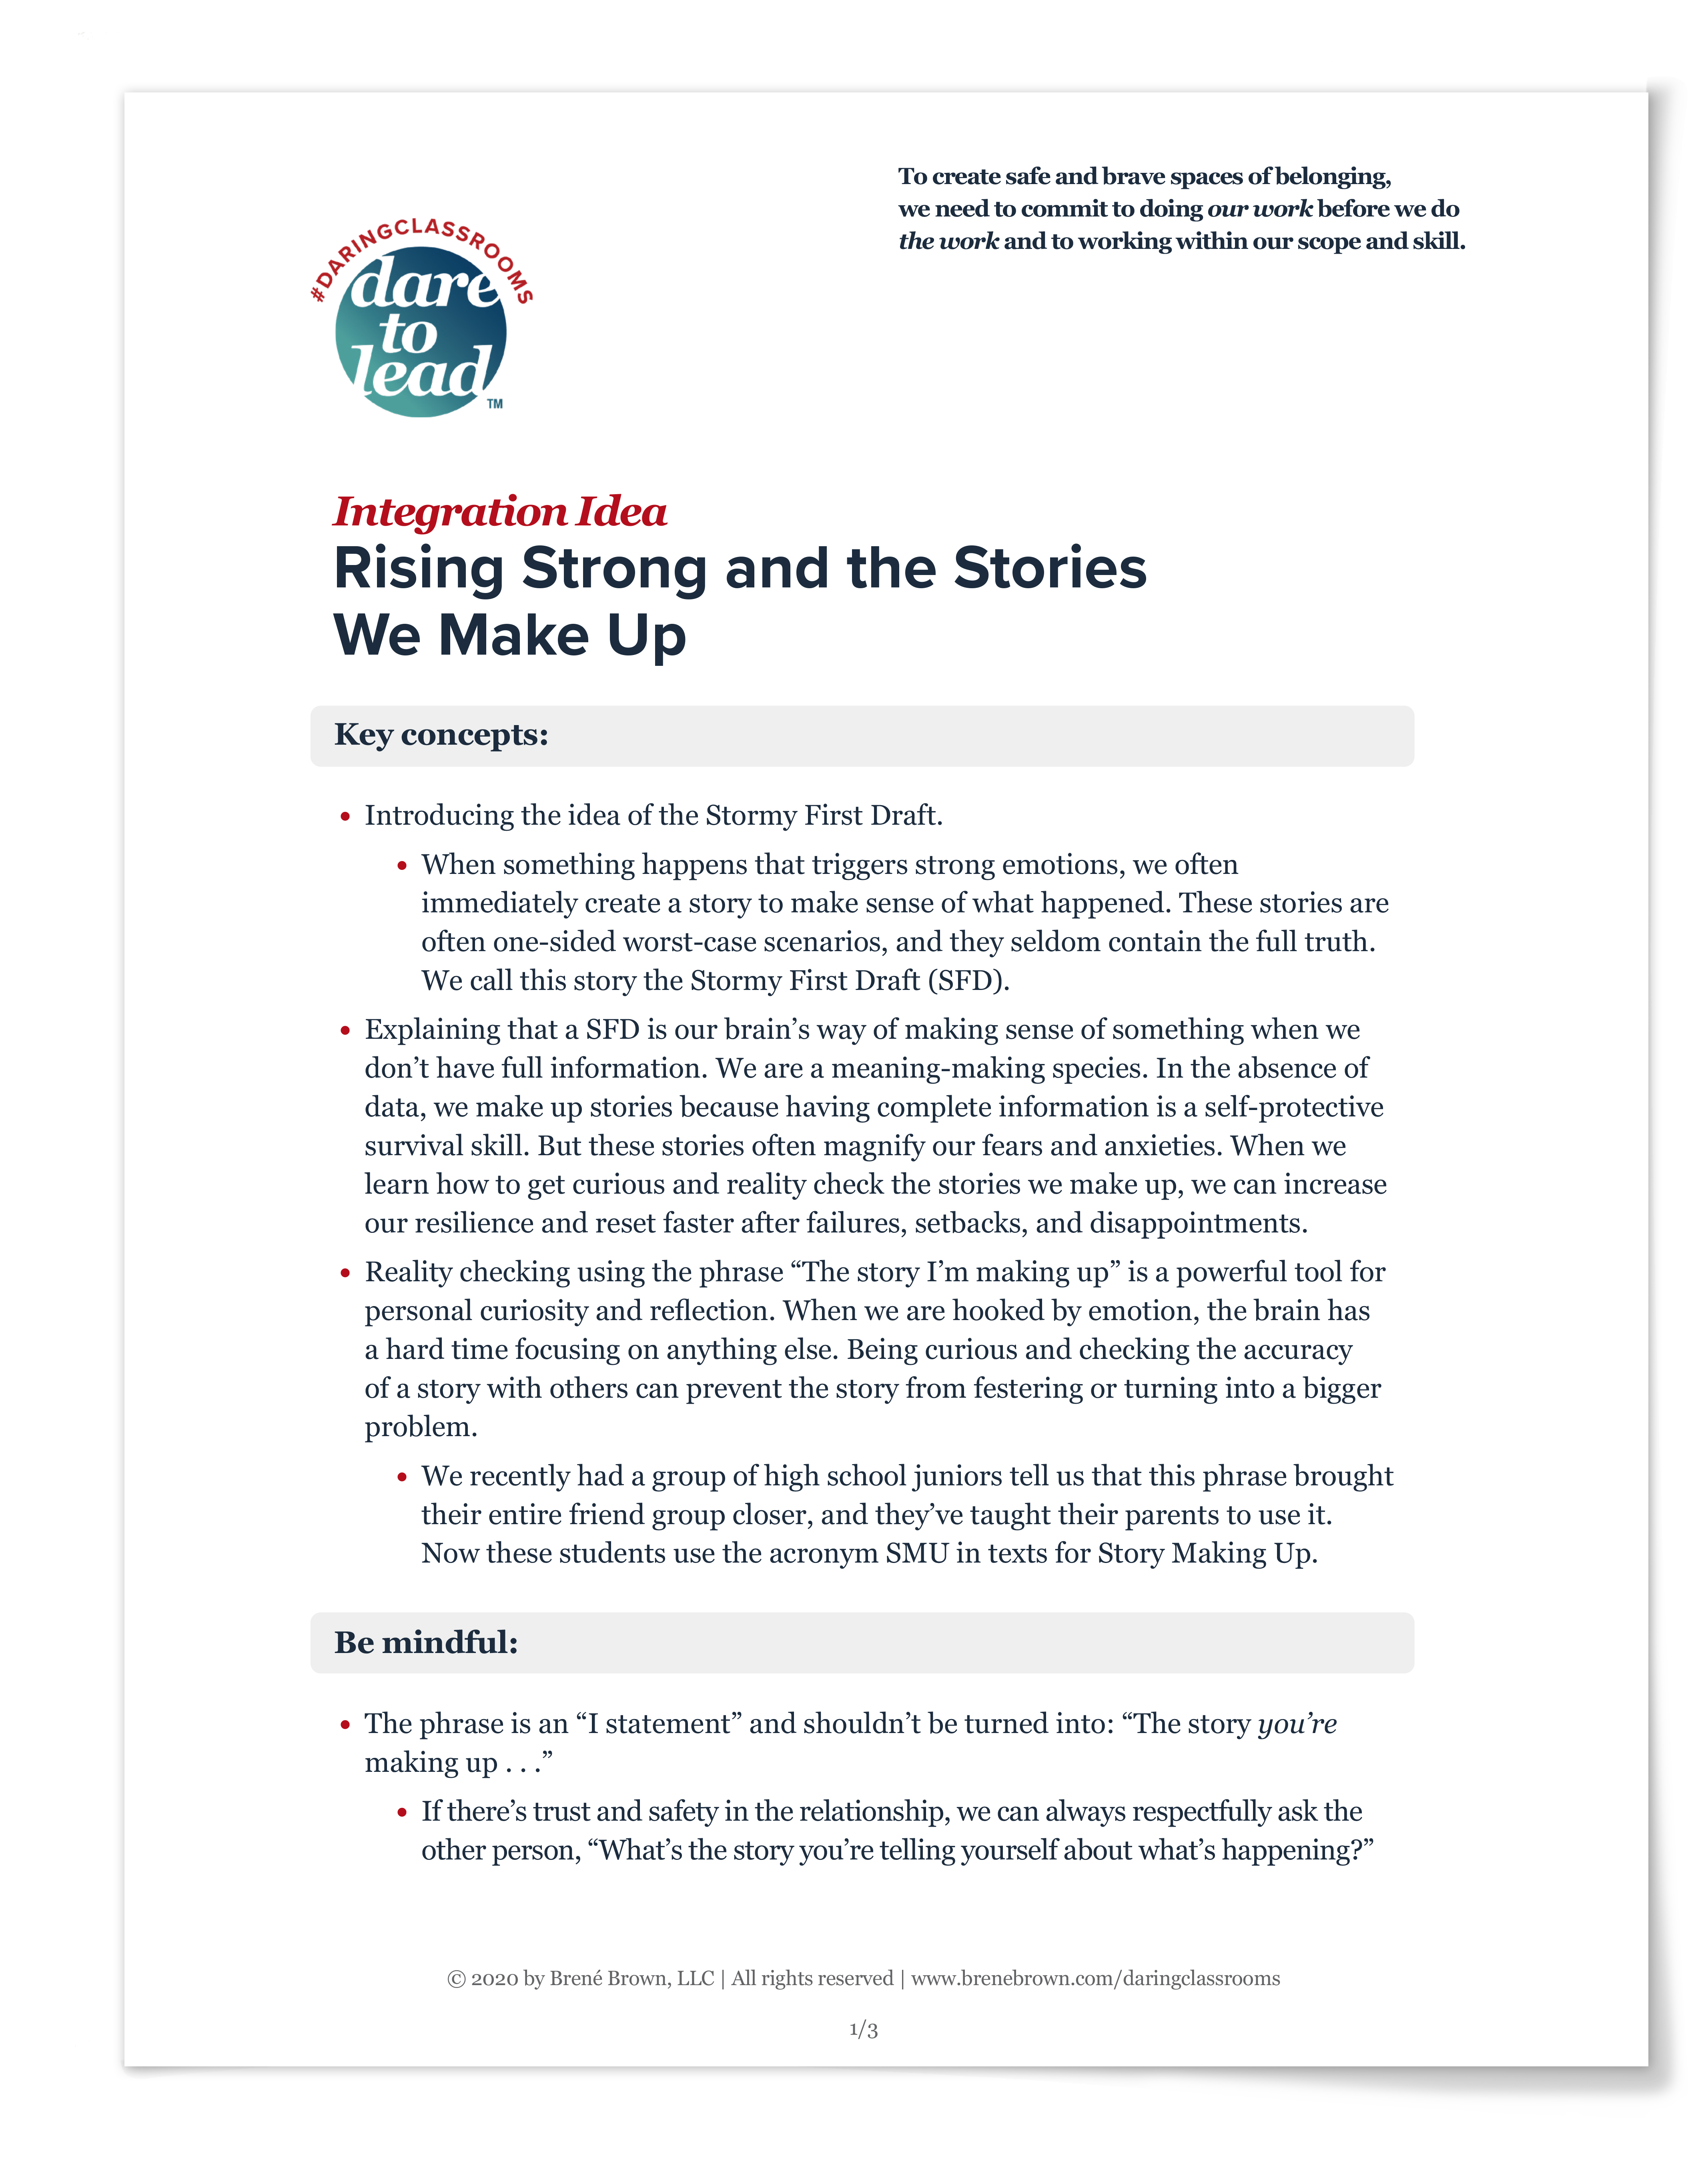 Rising Strong and the Stories We Make Up for Daring Classrooms